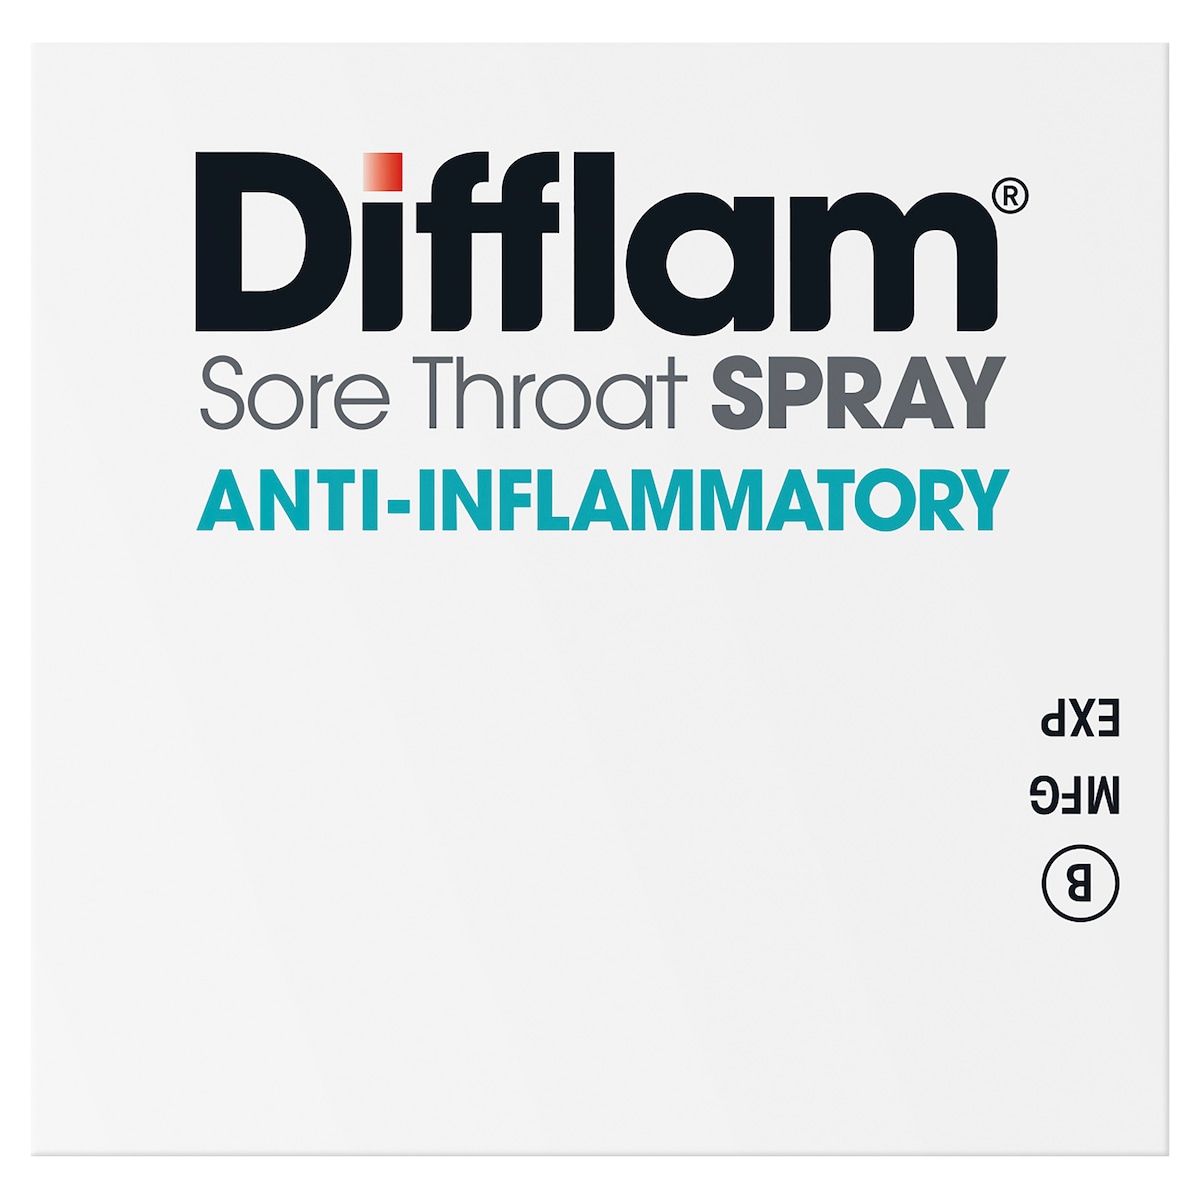 Difflam Sore Throat Spray Fast Pain Relief Fresh Mint 30Ml